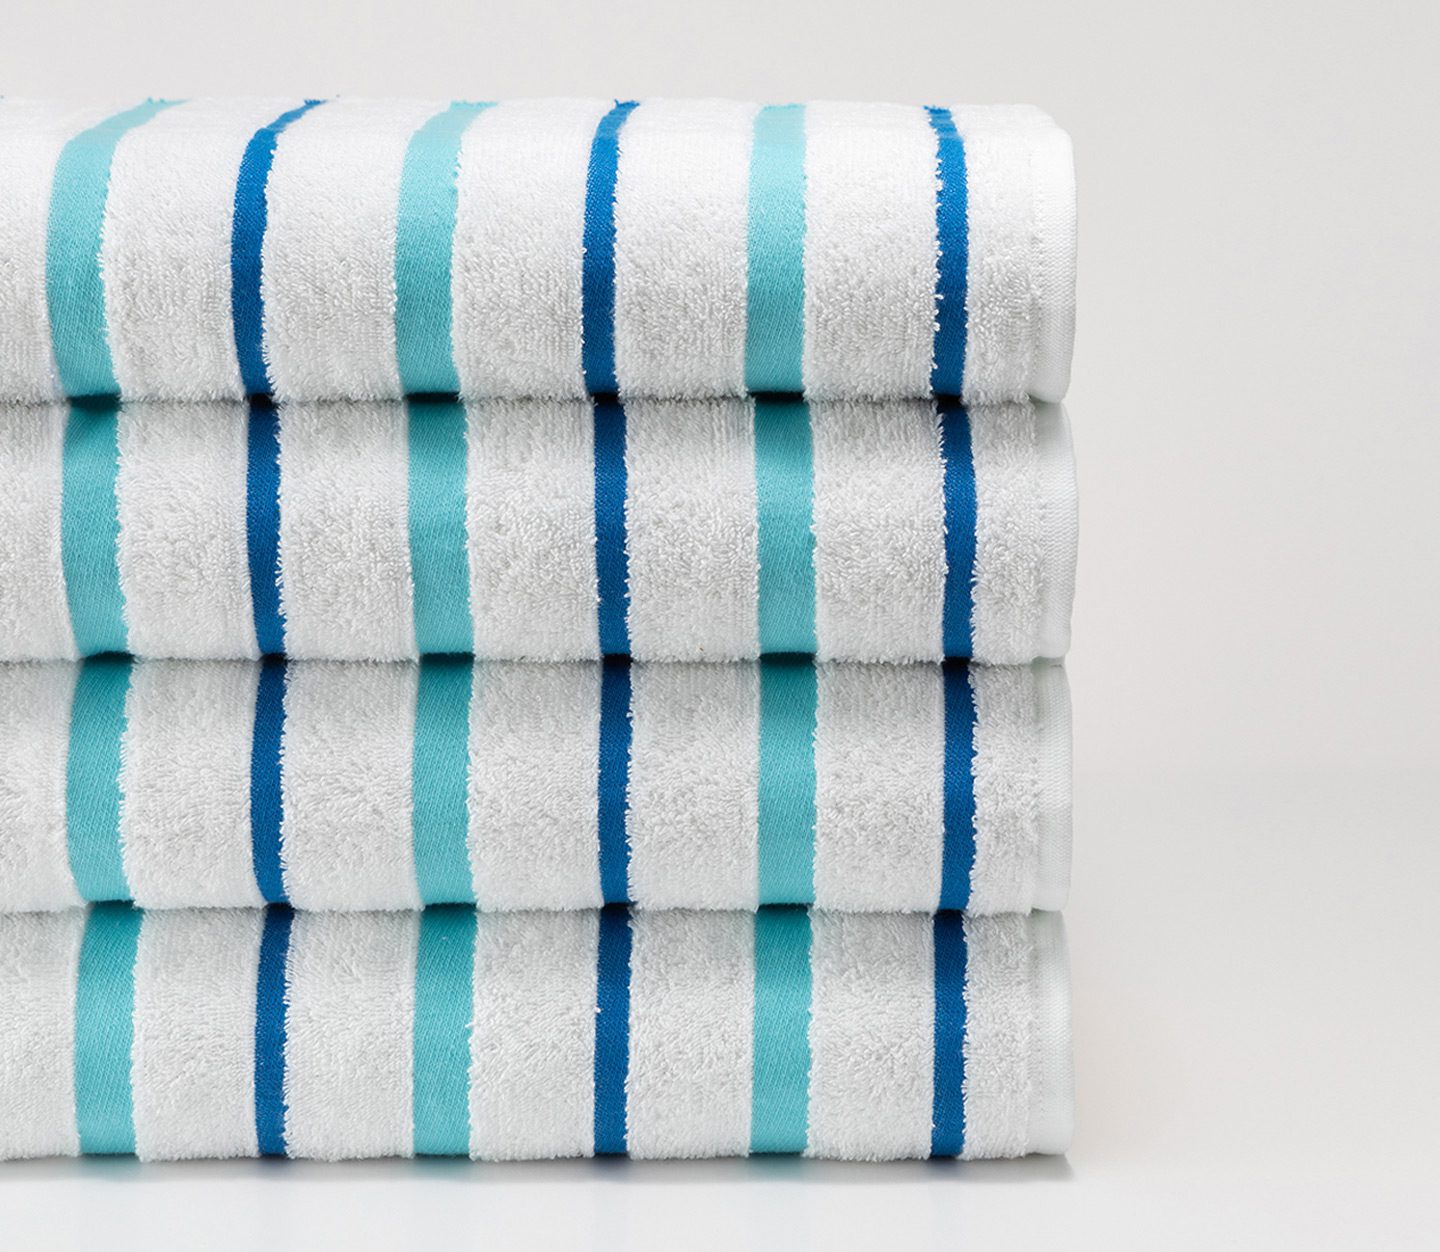 Biltmore® Egyptian Towel Collection